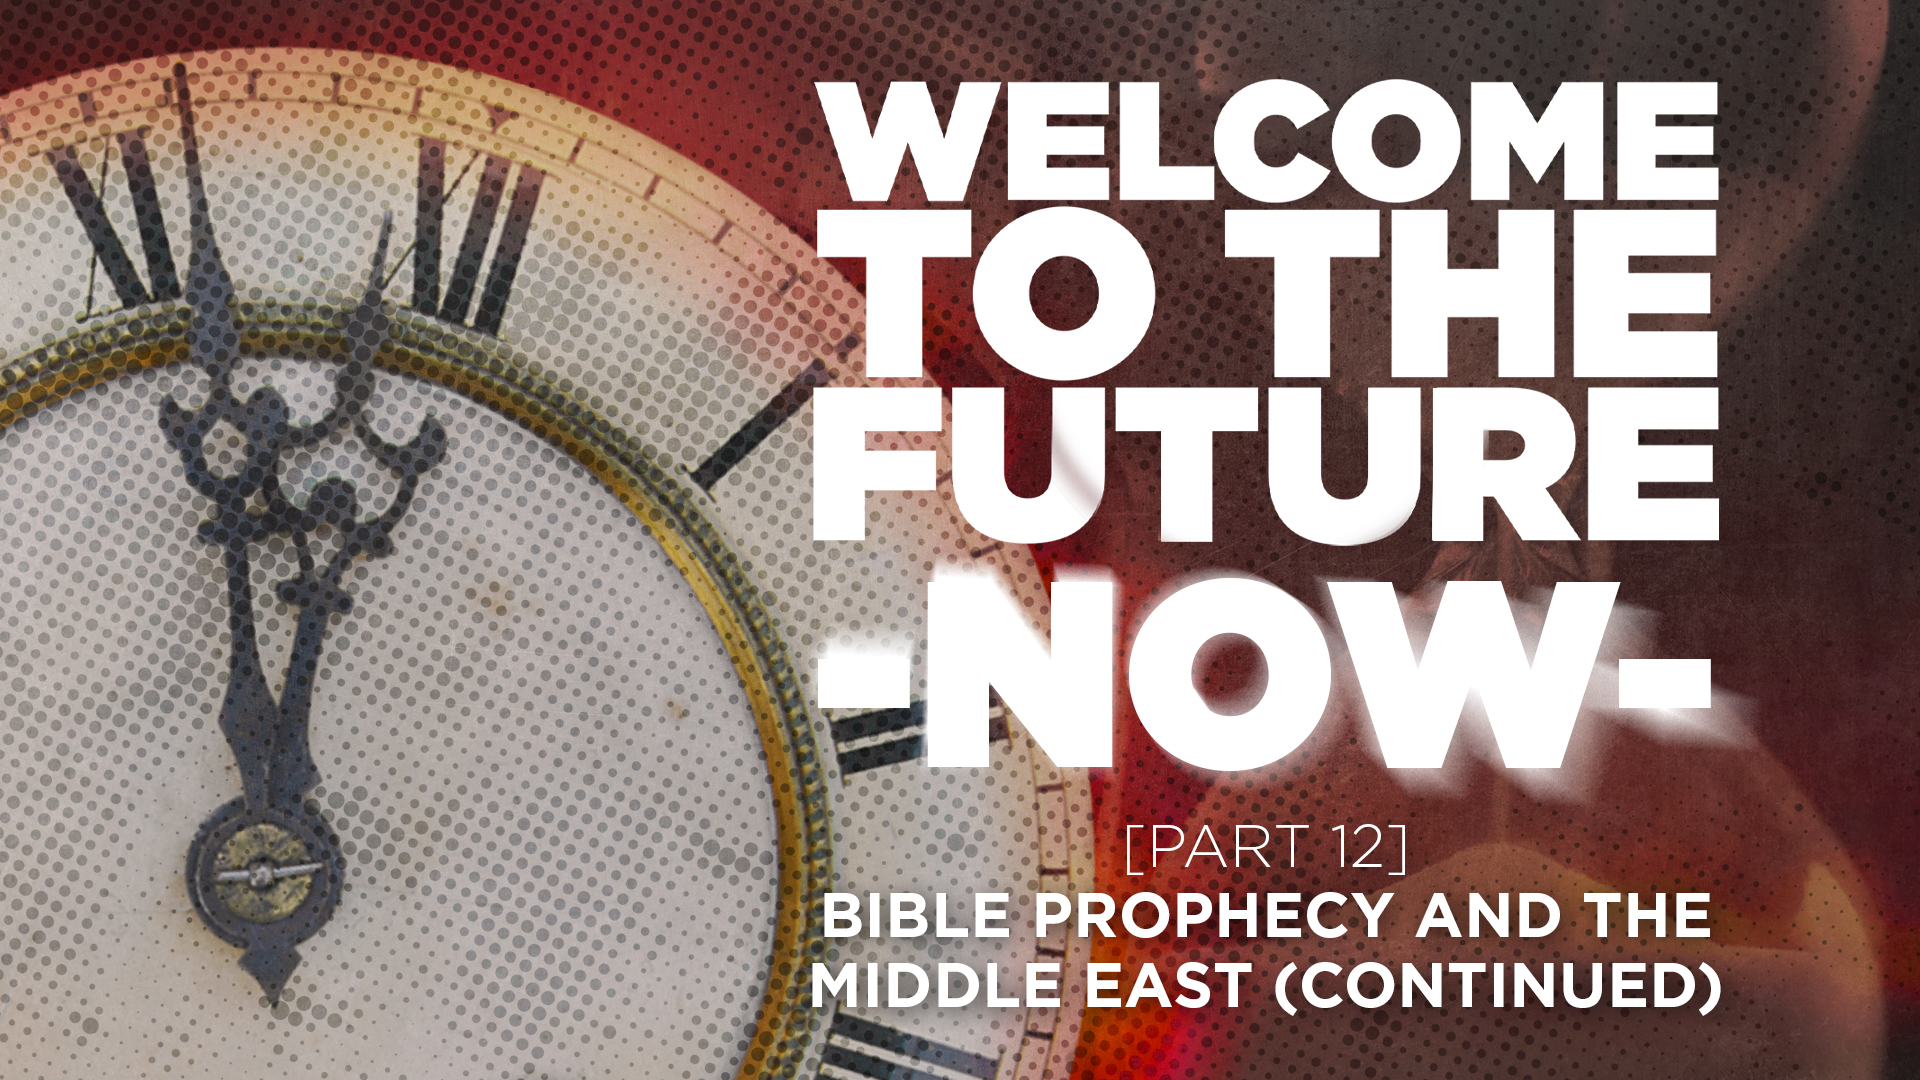 Part 12 - Bible Prophecy And The Middle East - Continued